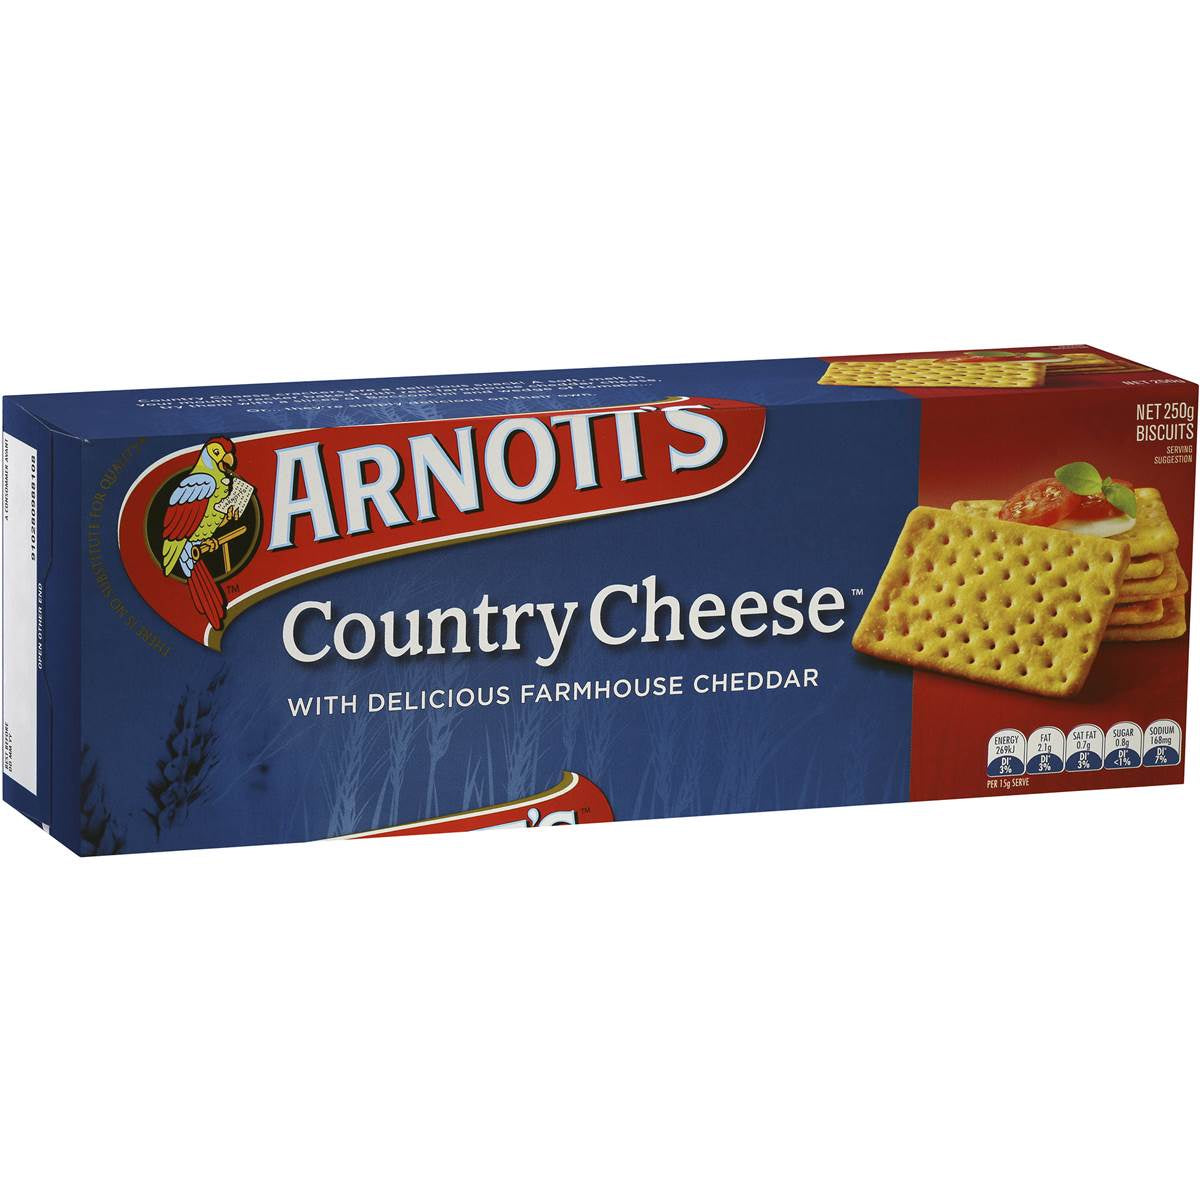 Arnotts Country Cheese Biscuits 250G